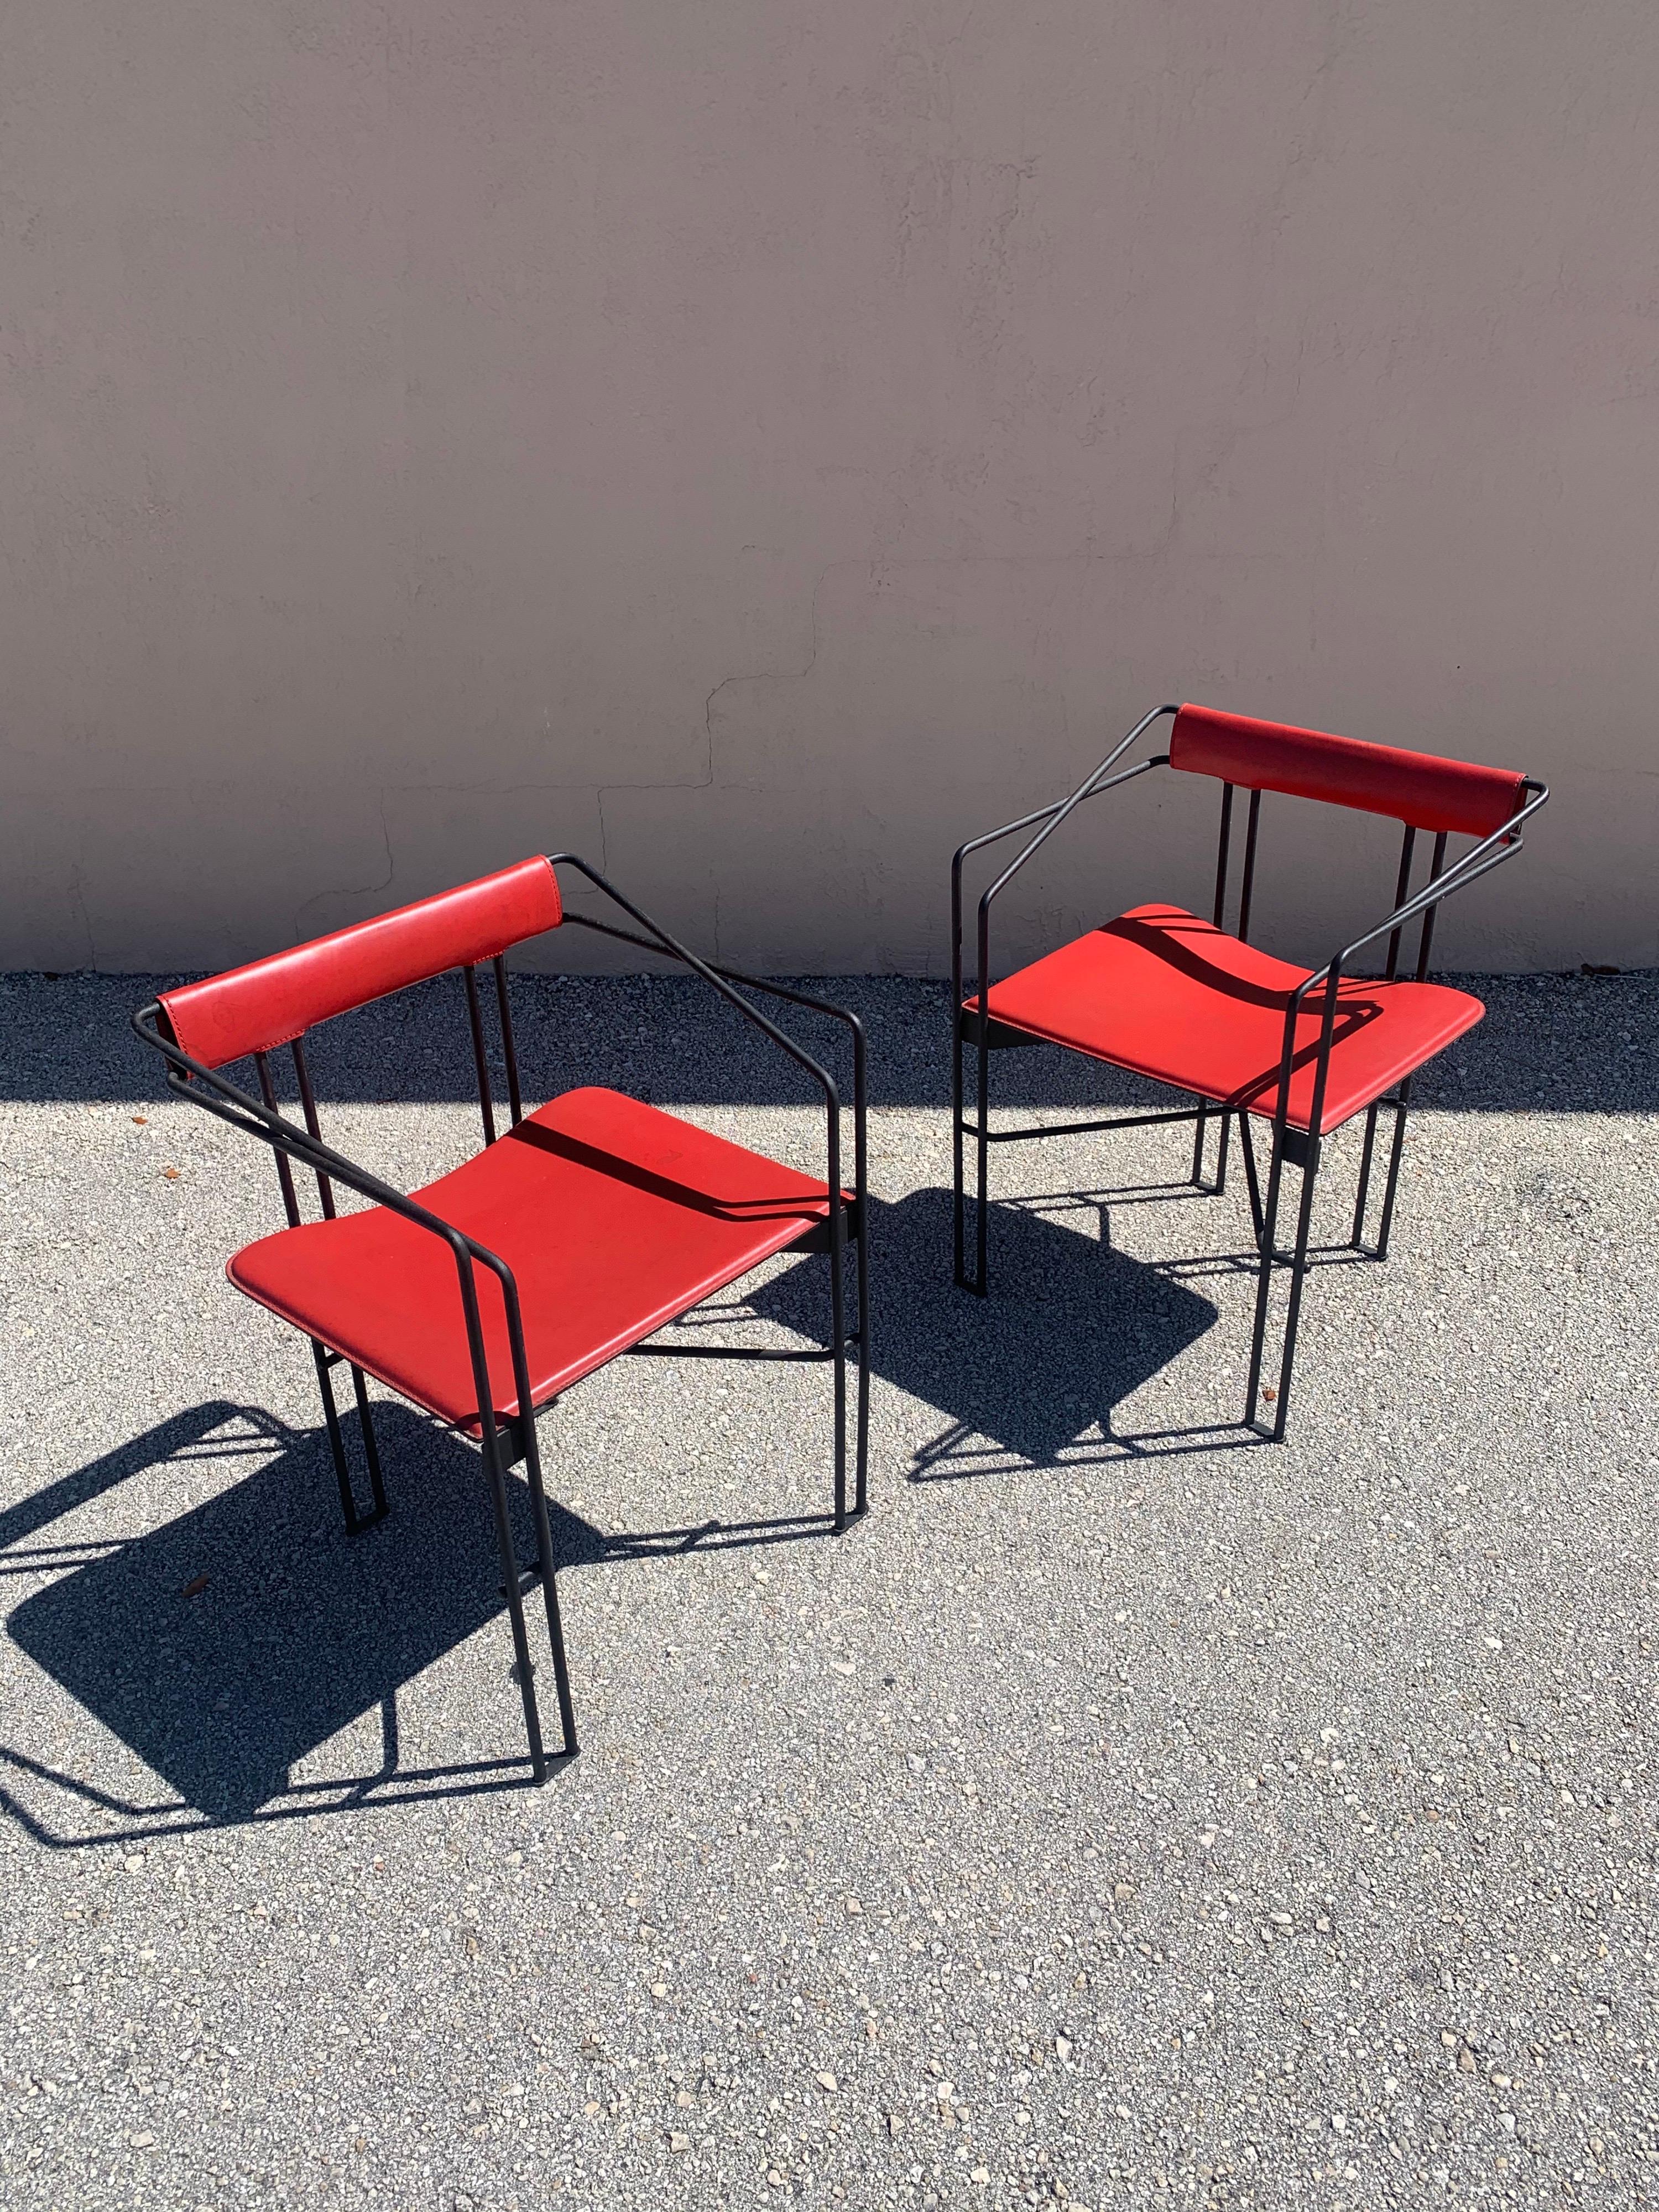 Stunning pair of post modern arm chairs in leather and iron. Thick red leather seats and back rest. Geometric wrought iron frames. Creating a striking pair of chairs.